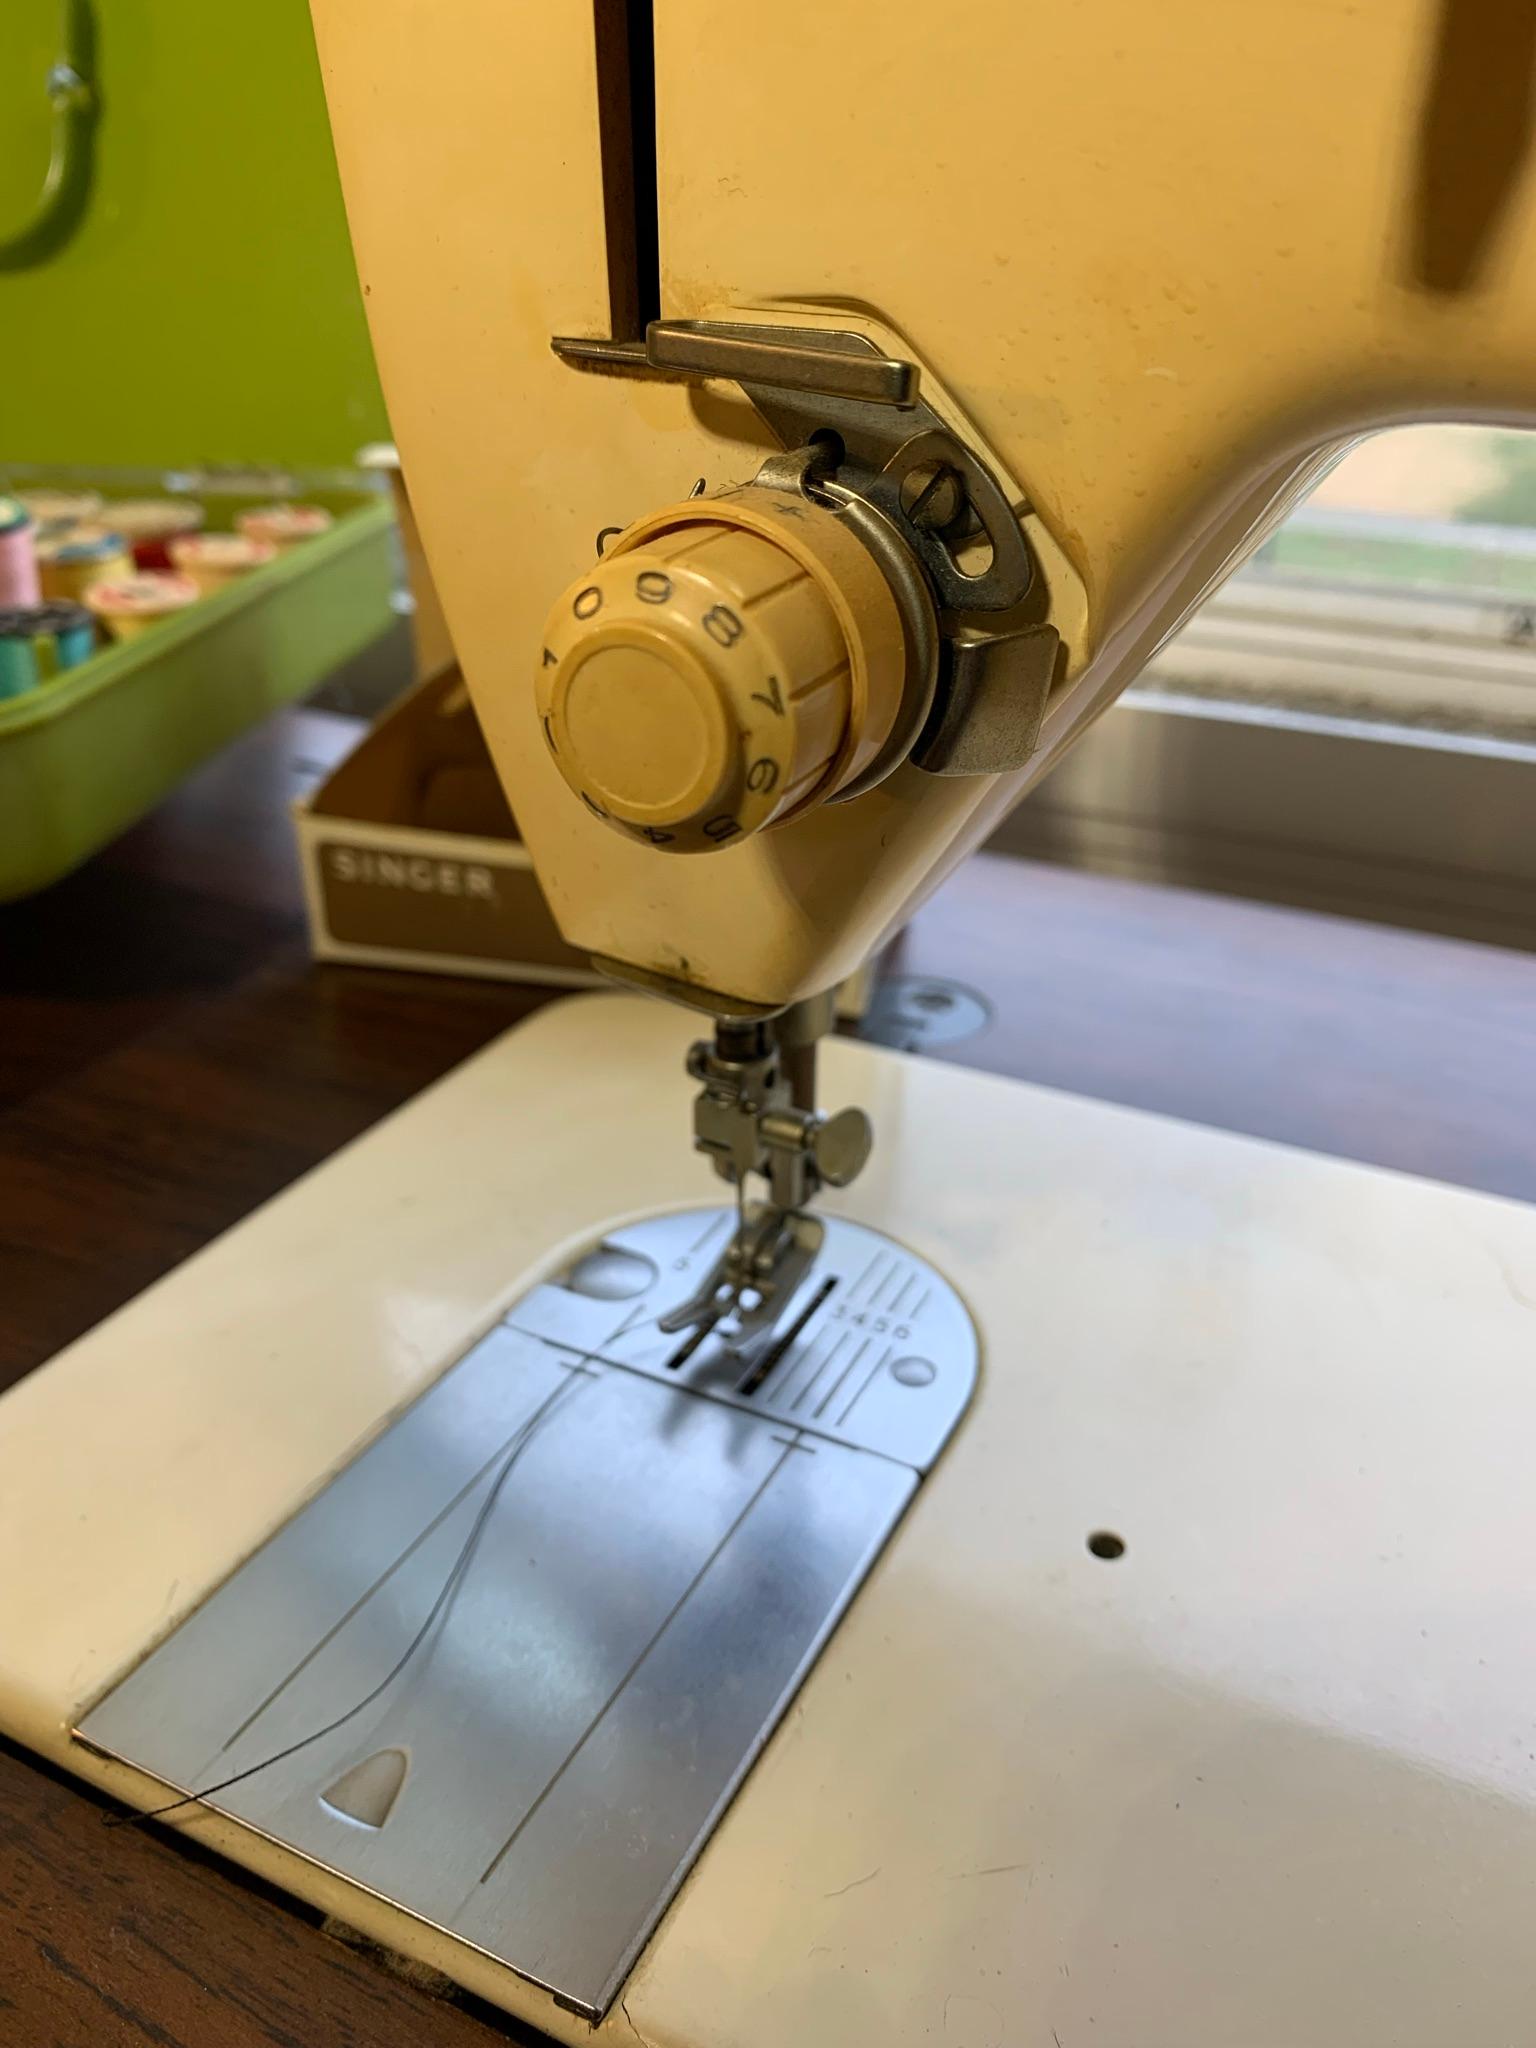 Singer Fashion Mate 362 Sewing Machine, Sewing Cabinet & Sewing Items